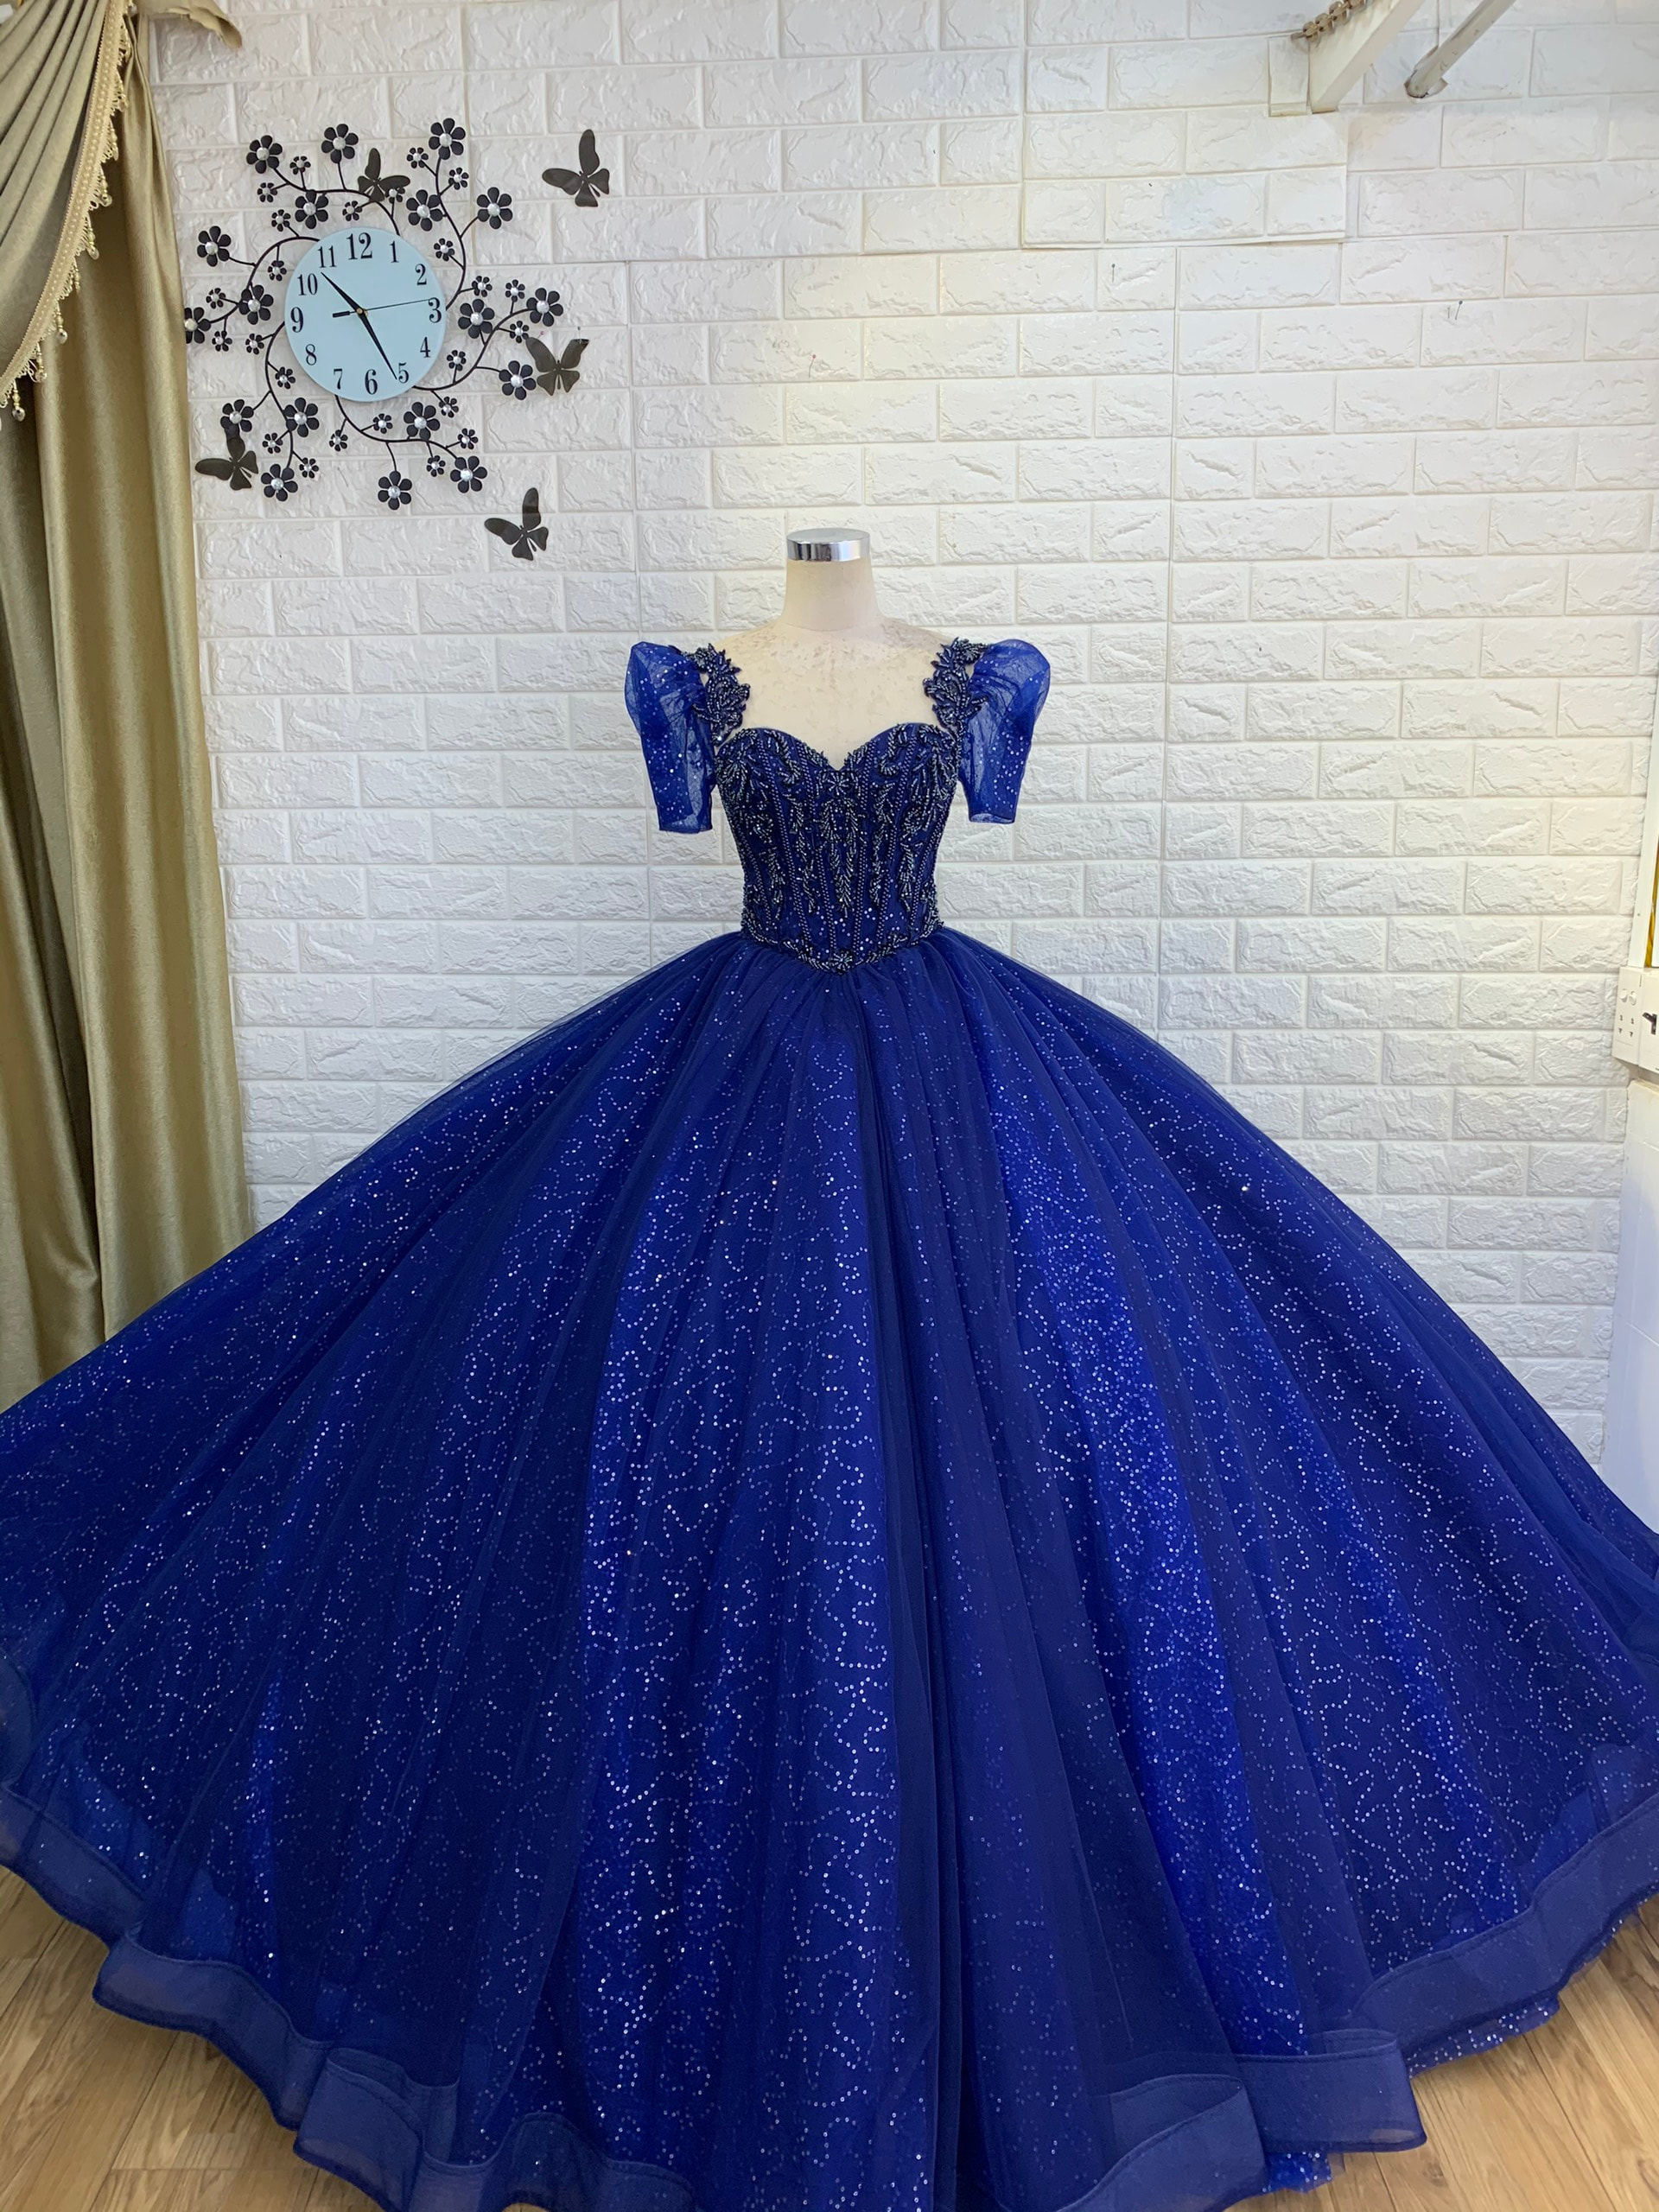 Striped Blue shimmer gown at Rs 3000 in Pune | ID: 26751246830